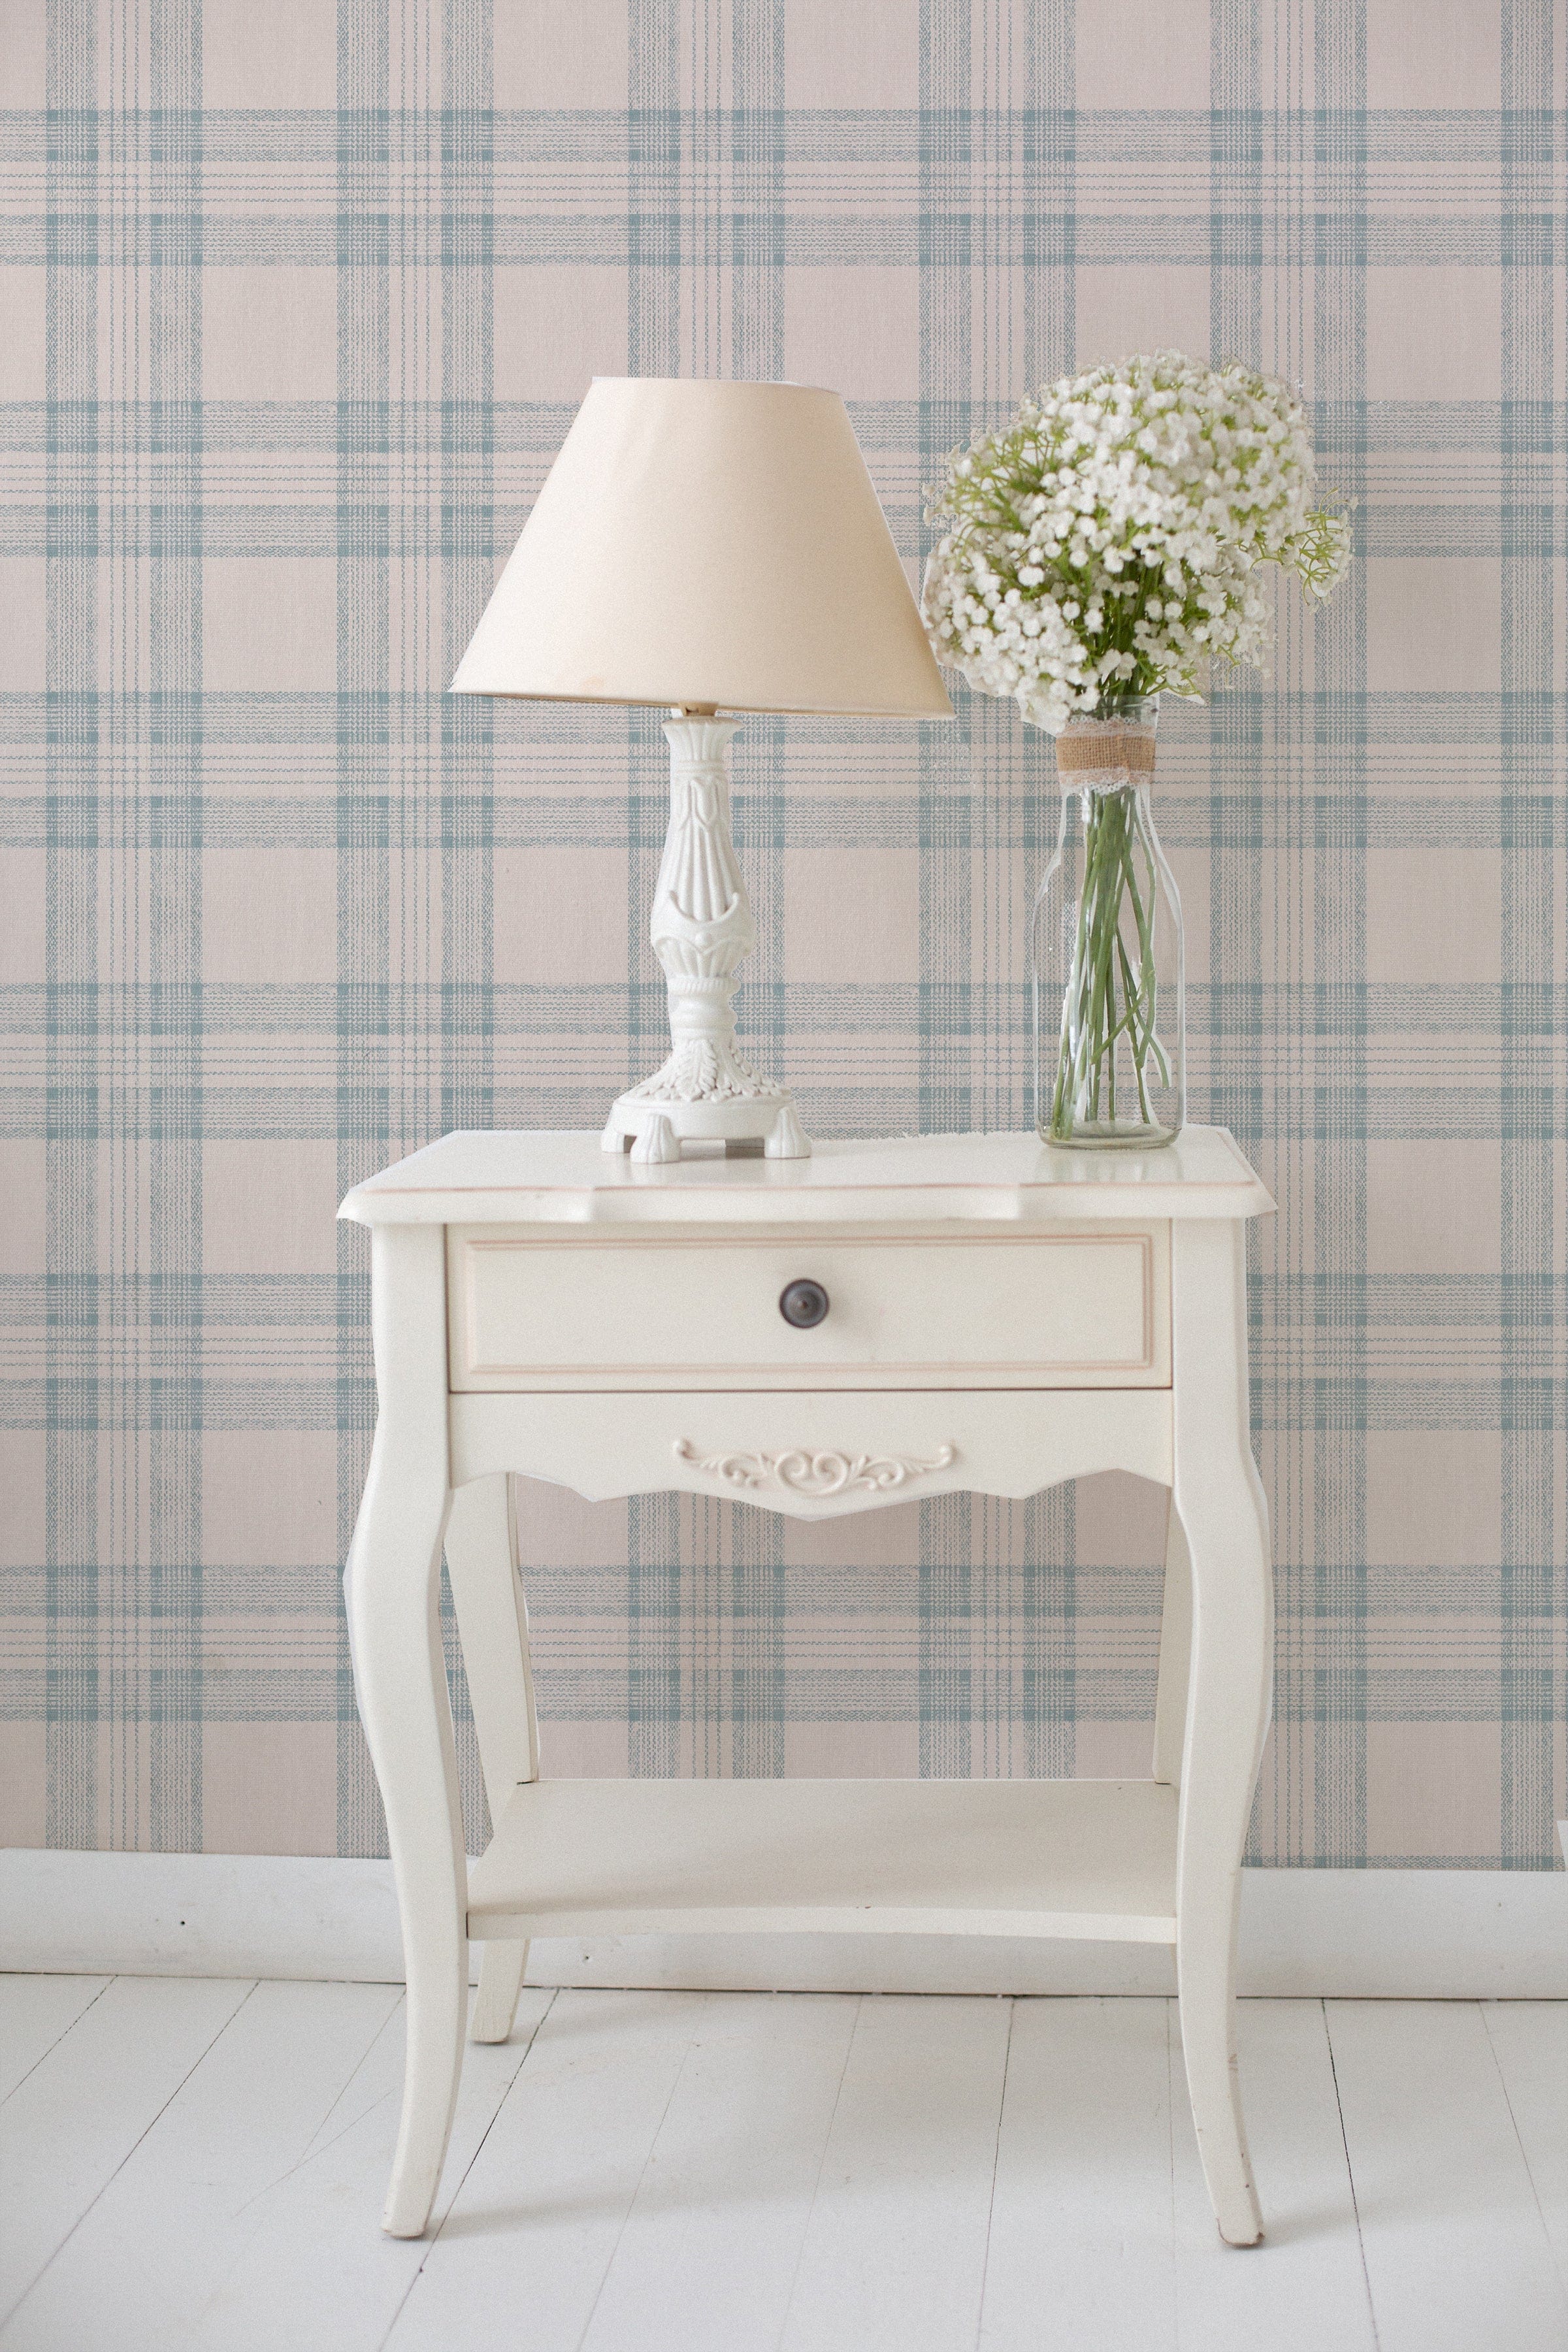 A quaint corner featuring the 'Plaid Wallpaper - Tartan Sand and Sky' as a backdrop, with a classic white side table bearing a traditional lamp with a beige shade and a clear glass vase filled with delicate white baby's breath flowers. The wallpaper's soft plaid pattern complements the vintage charm of the decor, creating a serene and welcoming space.